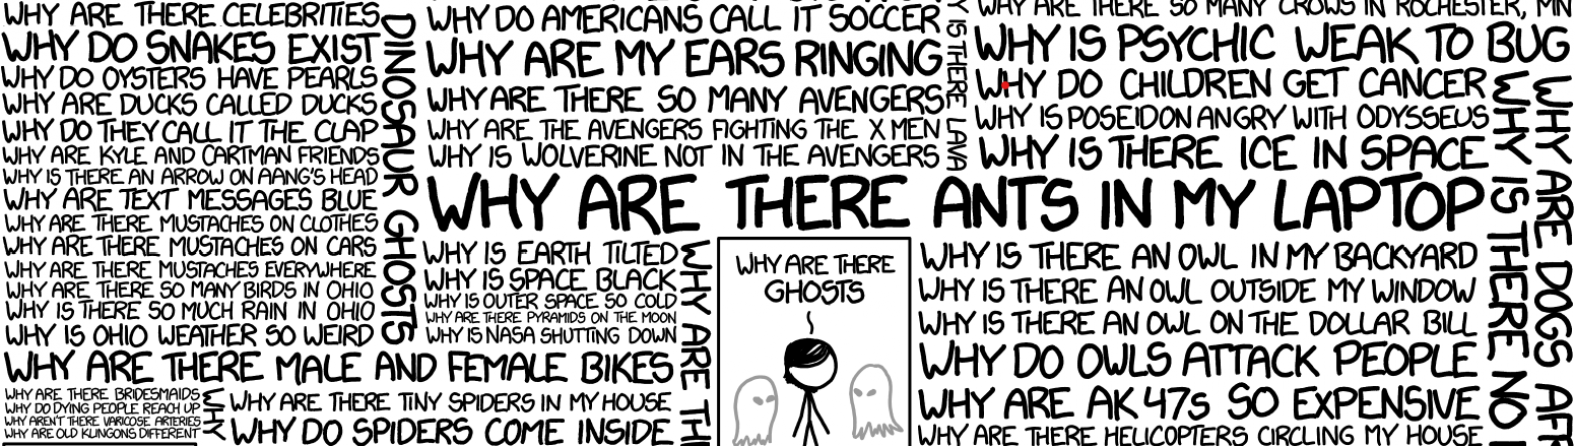 Examples of Ad Hoc Queries - XKCD Comic # 1256